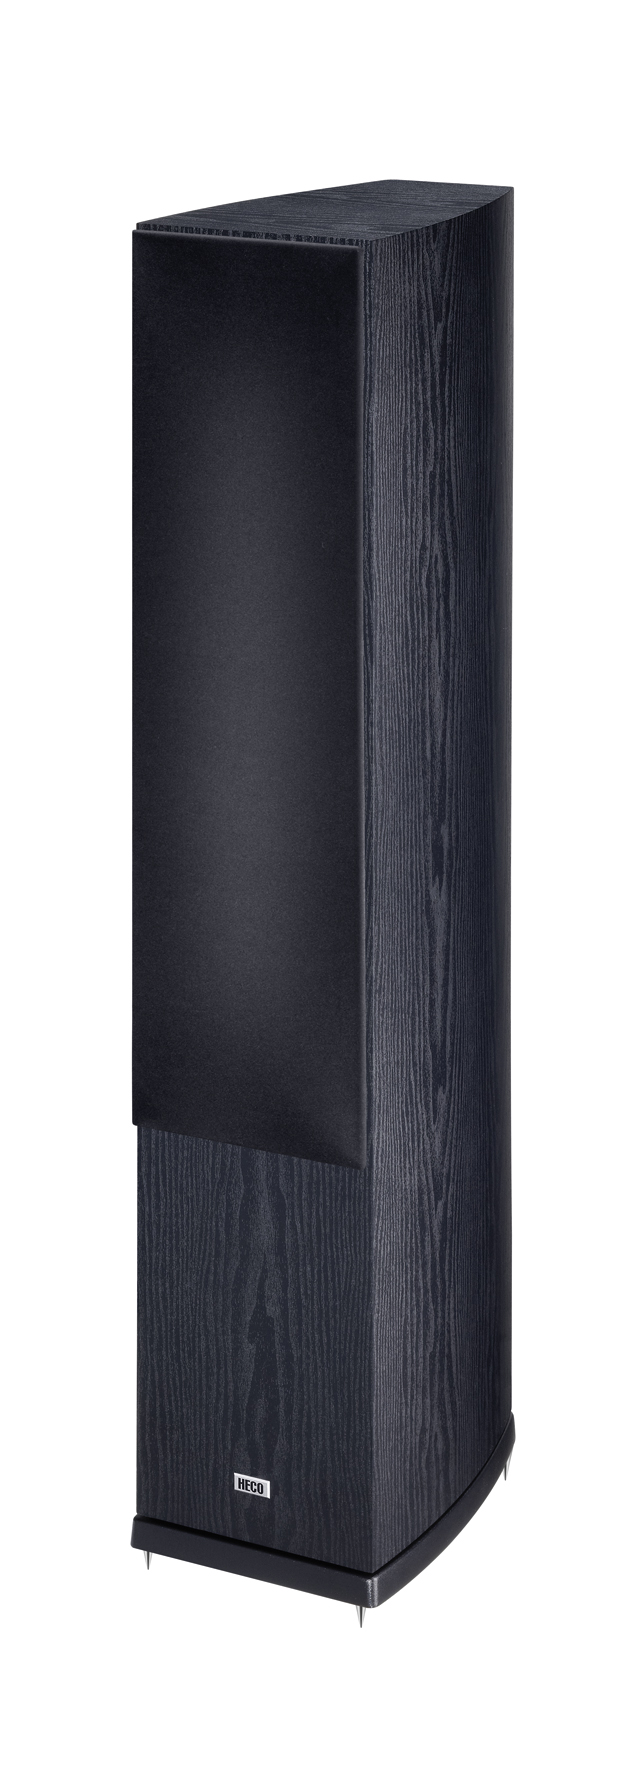 Victa Prime 702, 3-way floorstanding speaker, bass reflex configuration with double bass driver